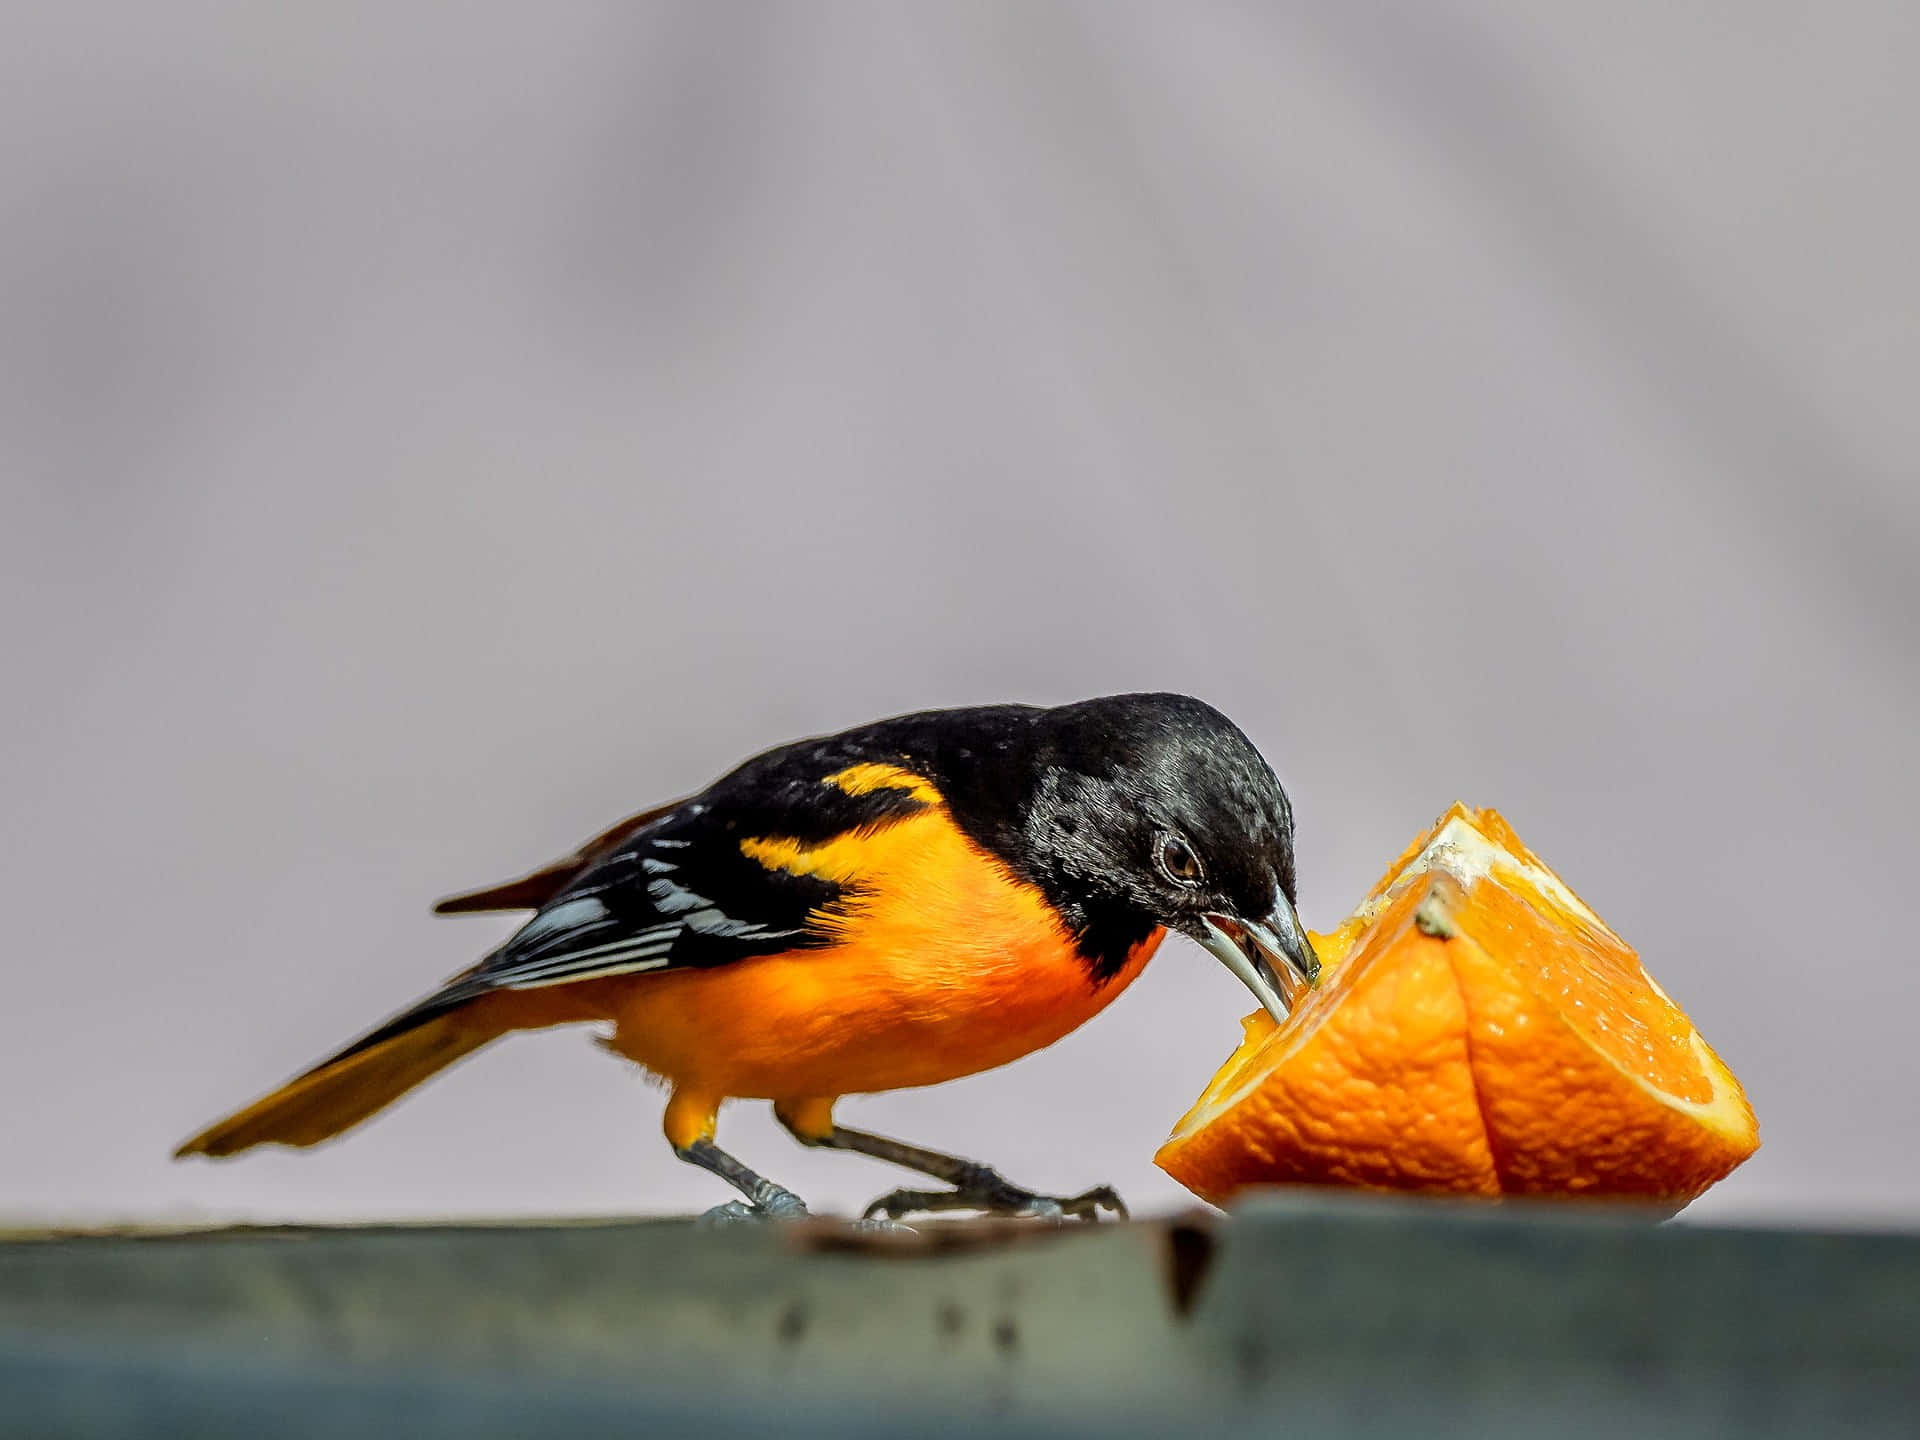 A Bright and Colorful Orioles Bird